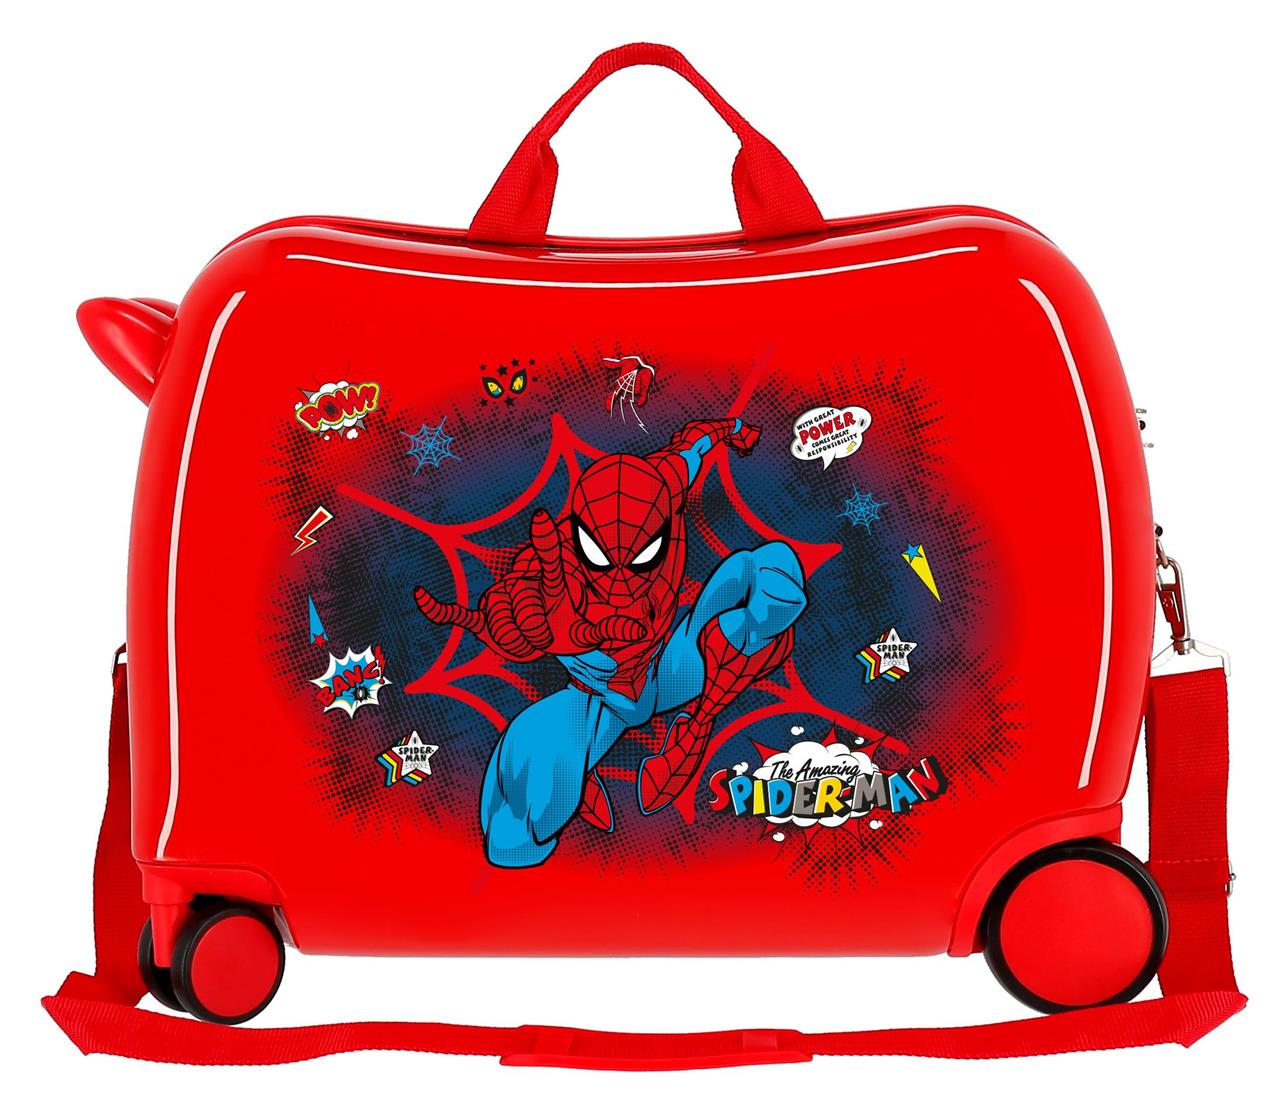 Spiderman Ride on Suitcase Red Kids aged 3-7 - liquidation.store